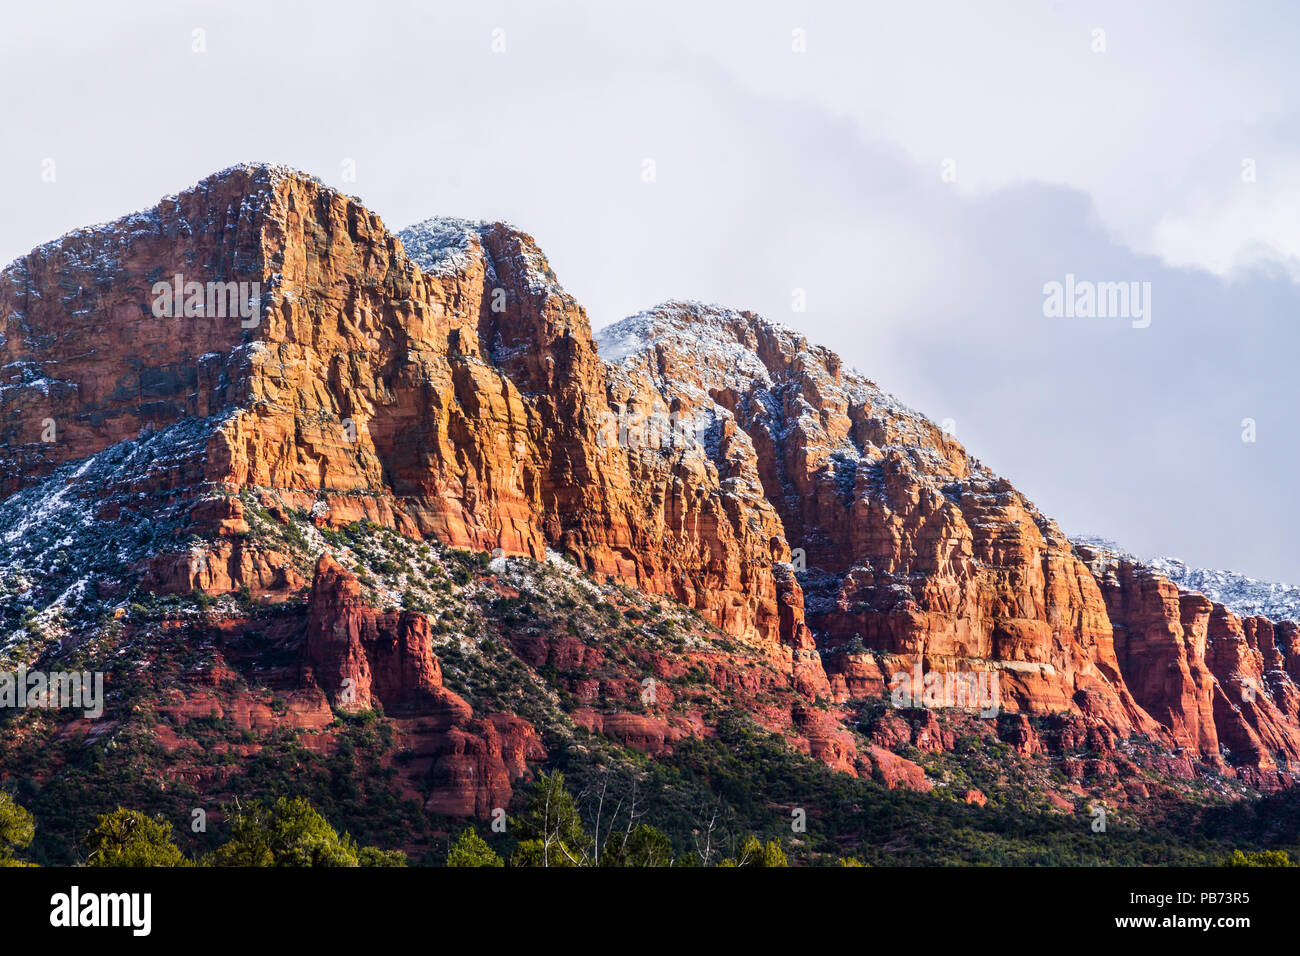 Rocky, rugged red sandstone hillside in Sedona, Arizona. Top is sprinkled with snow, cloudy sky is in the background. Sun is shining on one side. Stock Photo